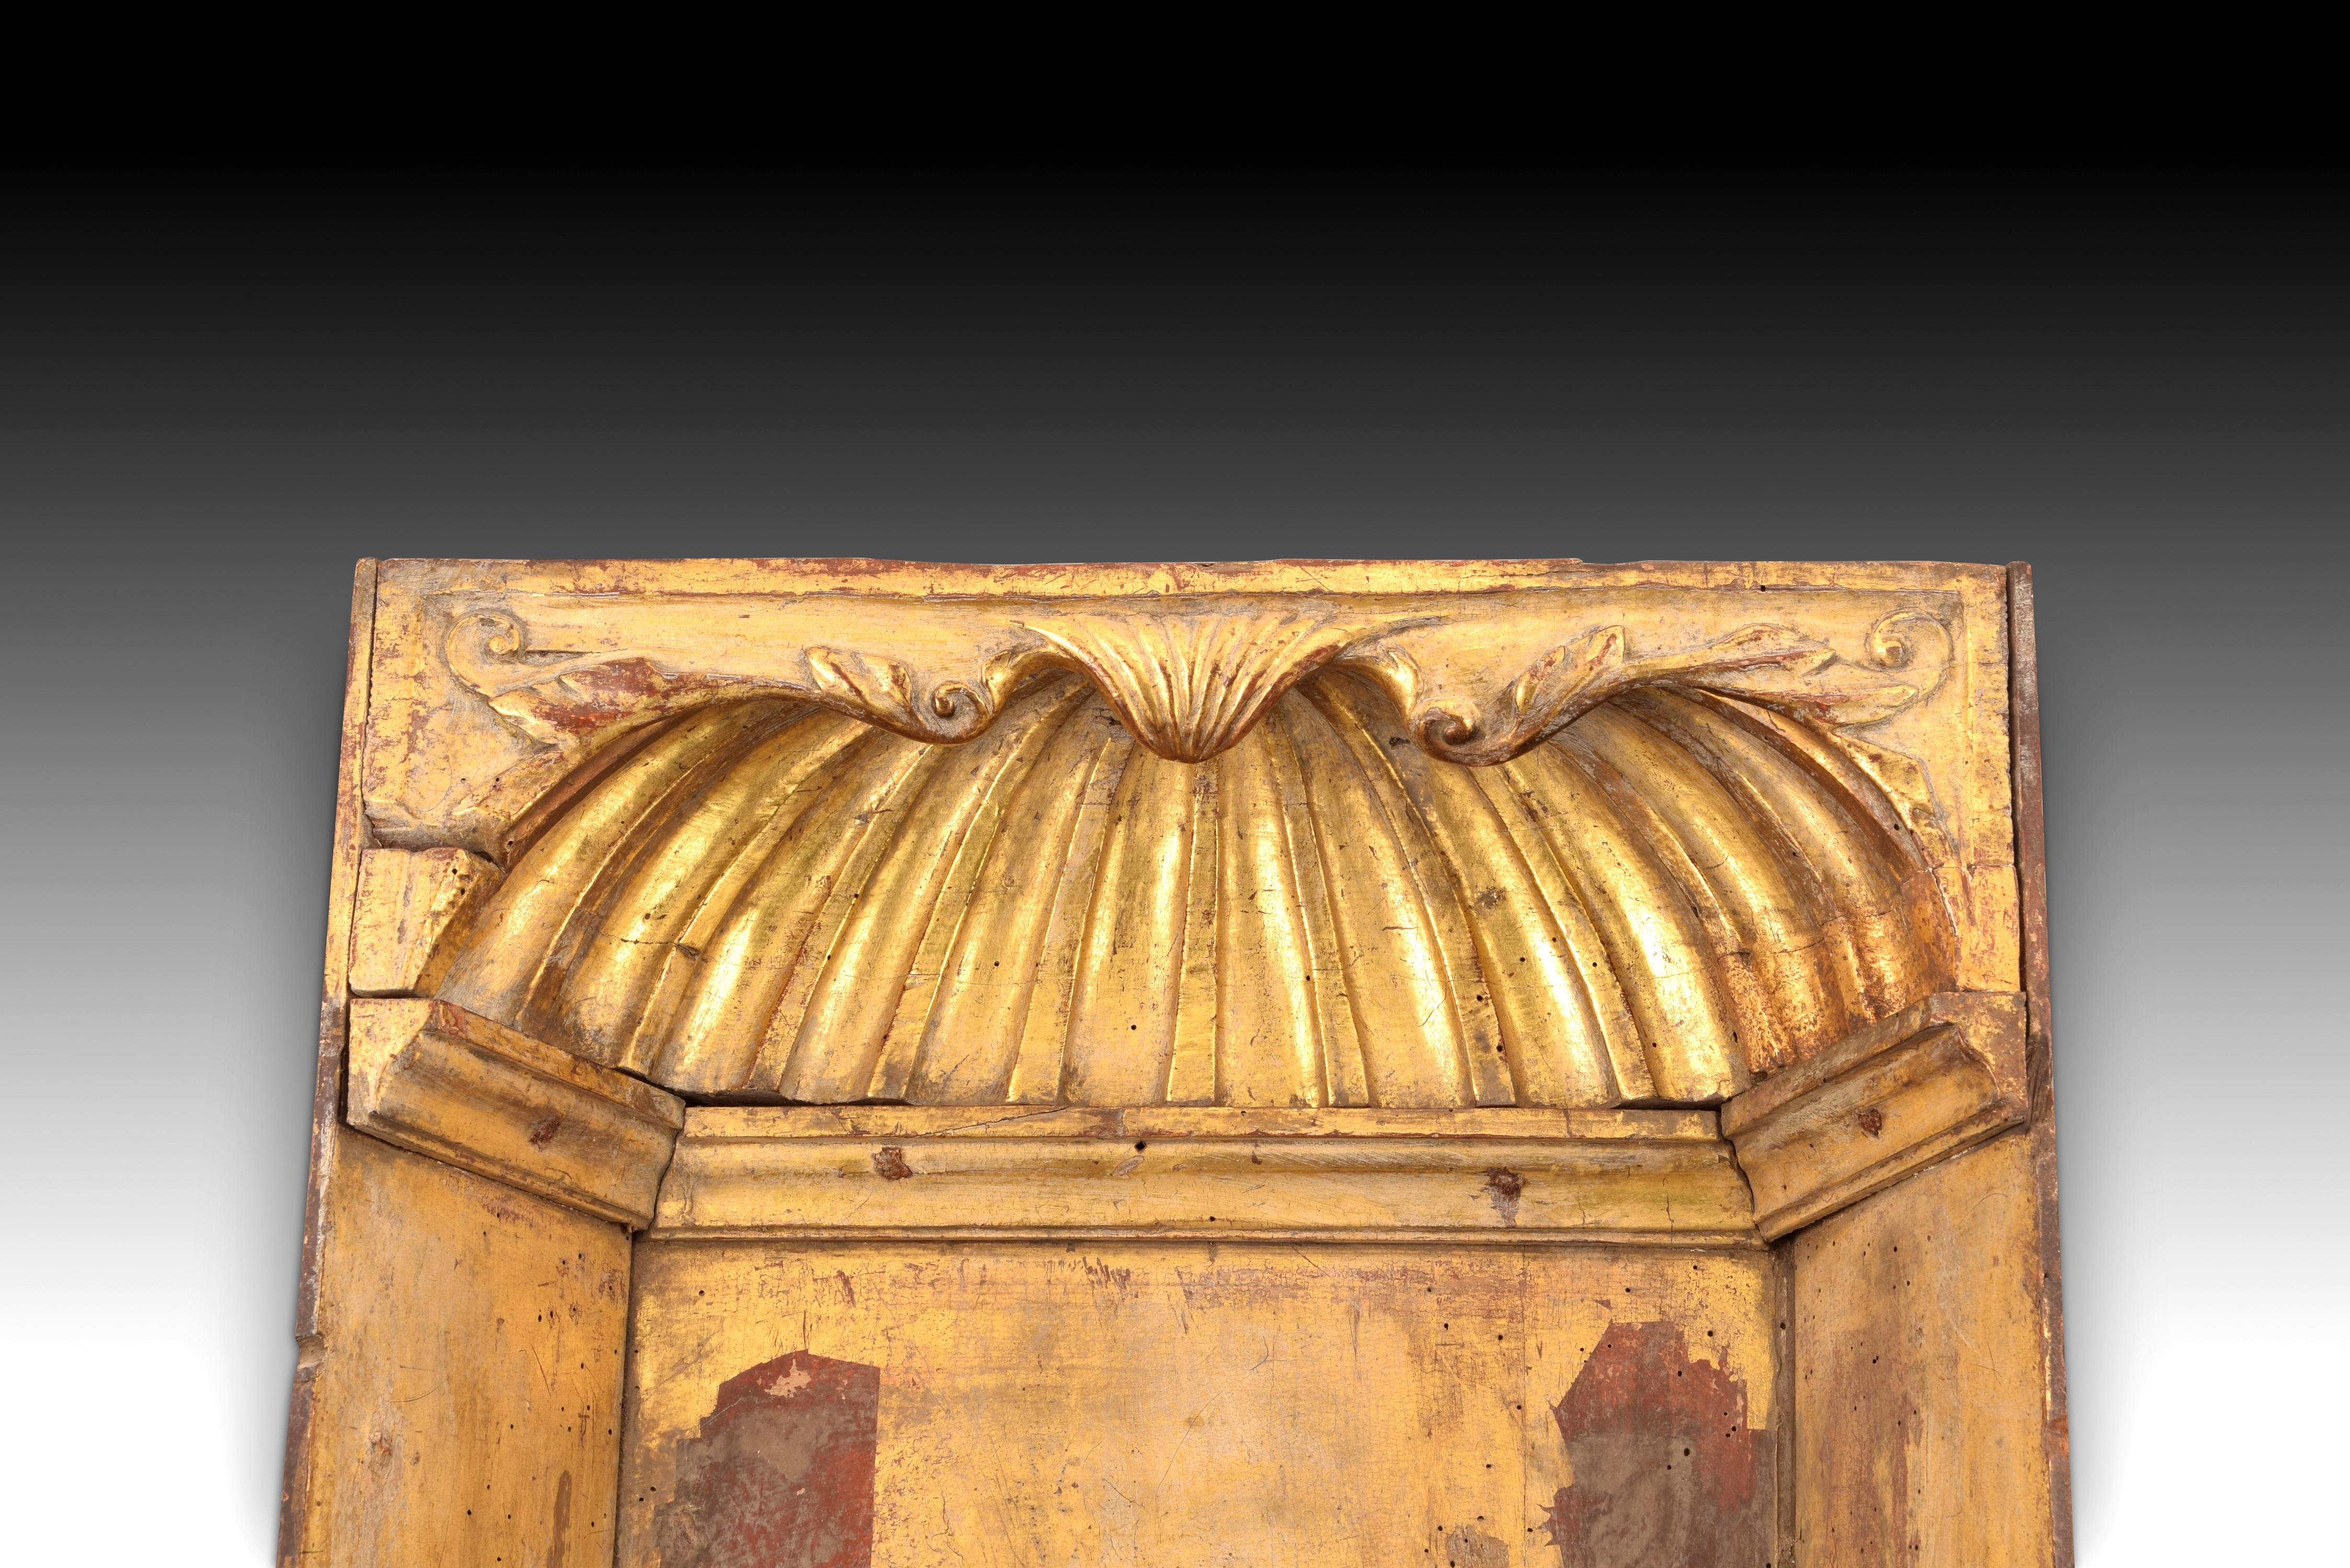 Niche. Gilded and polychrome pine wood. Spain, 17th century. 
Niche made of carved and gilded pine wood, decorated with moldings, a venerated shape and plant elements in the upper part, which has a clear classicist influence, common in some